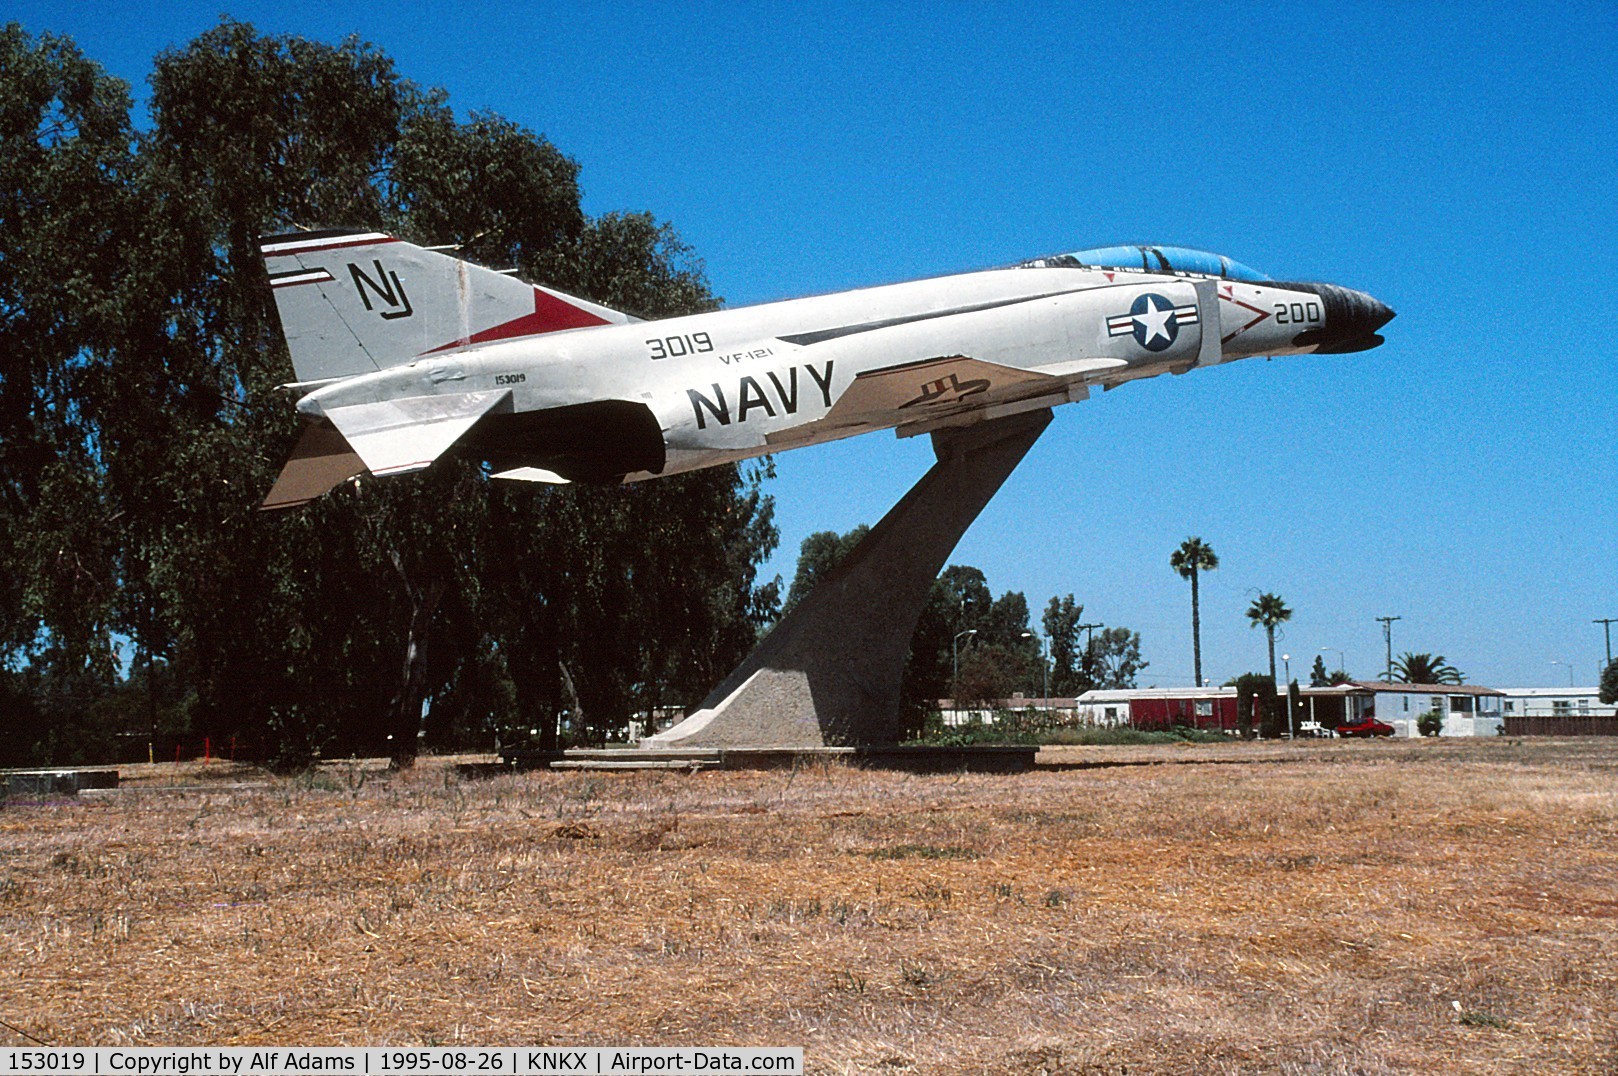 153019, McDonnell F-4N Phantom II C/N 1509, Shown displayed at NAS Miramar, San Diego, California, in 1995. This aircraft is now on display at NAS Key West, Florida.